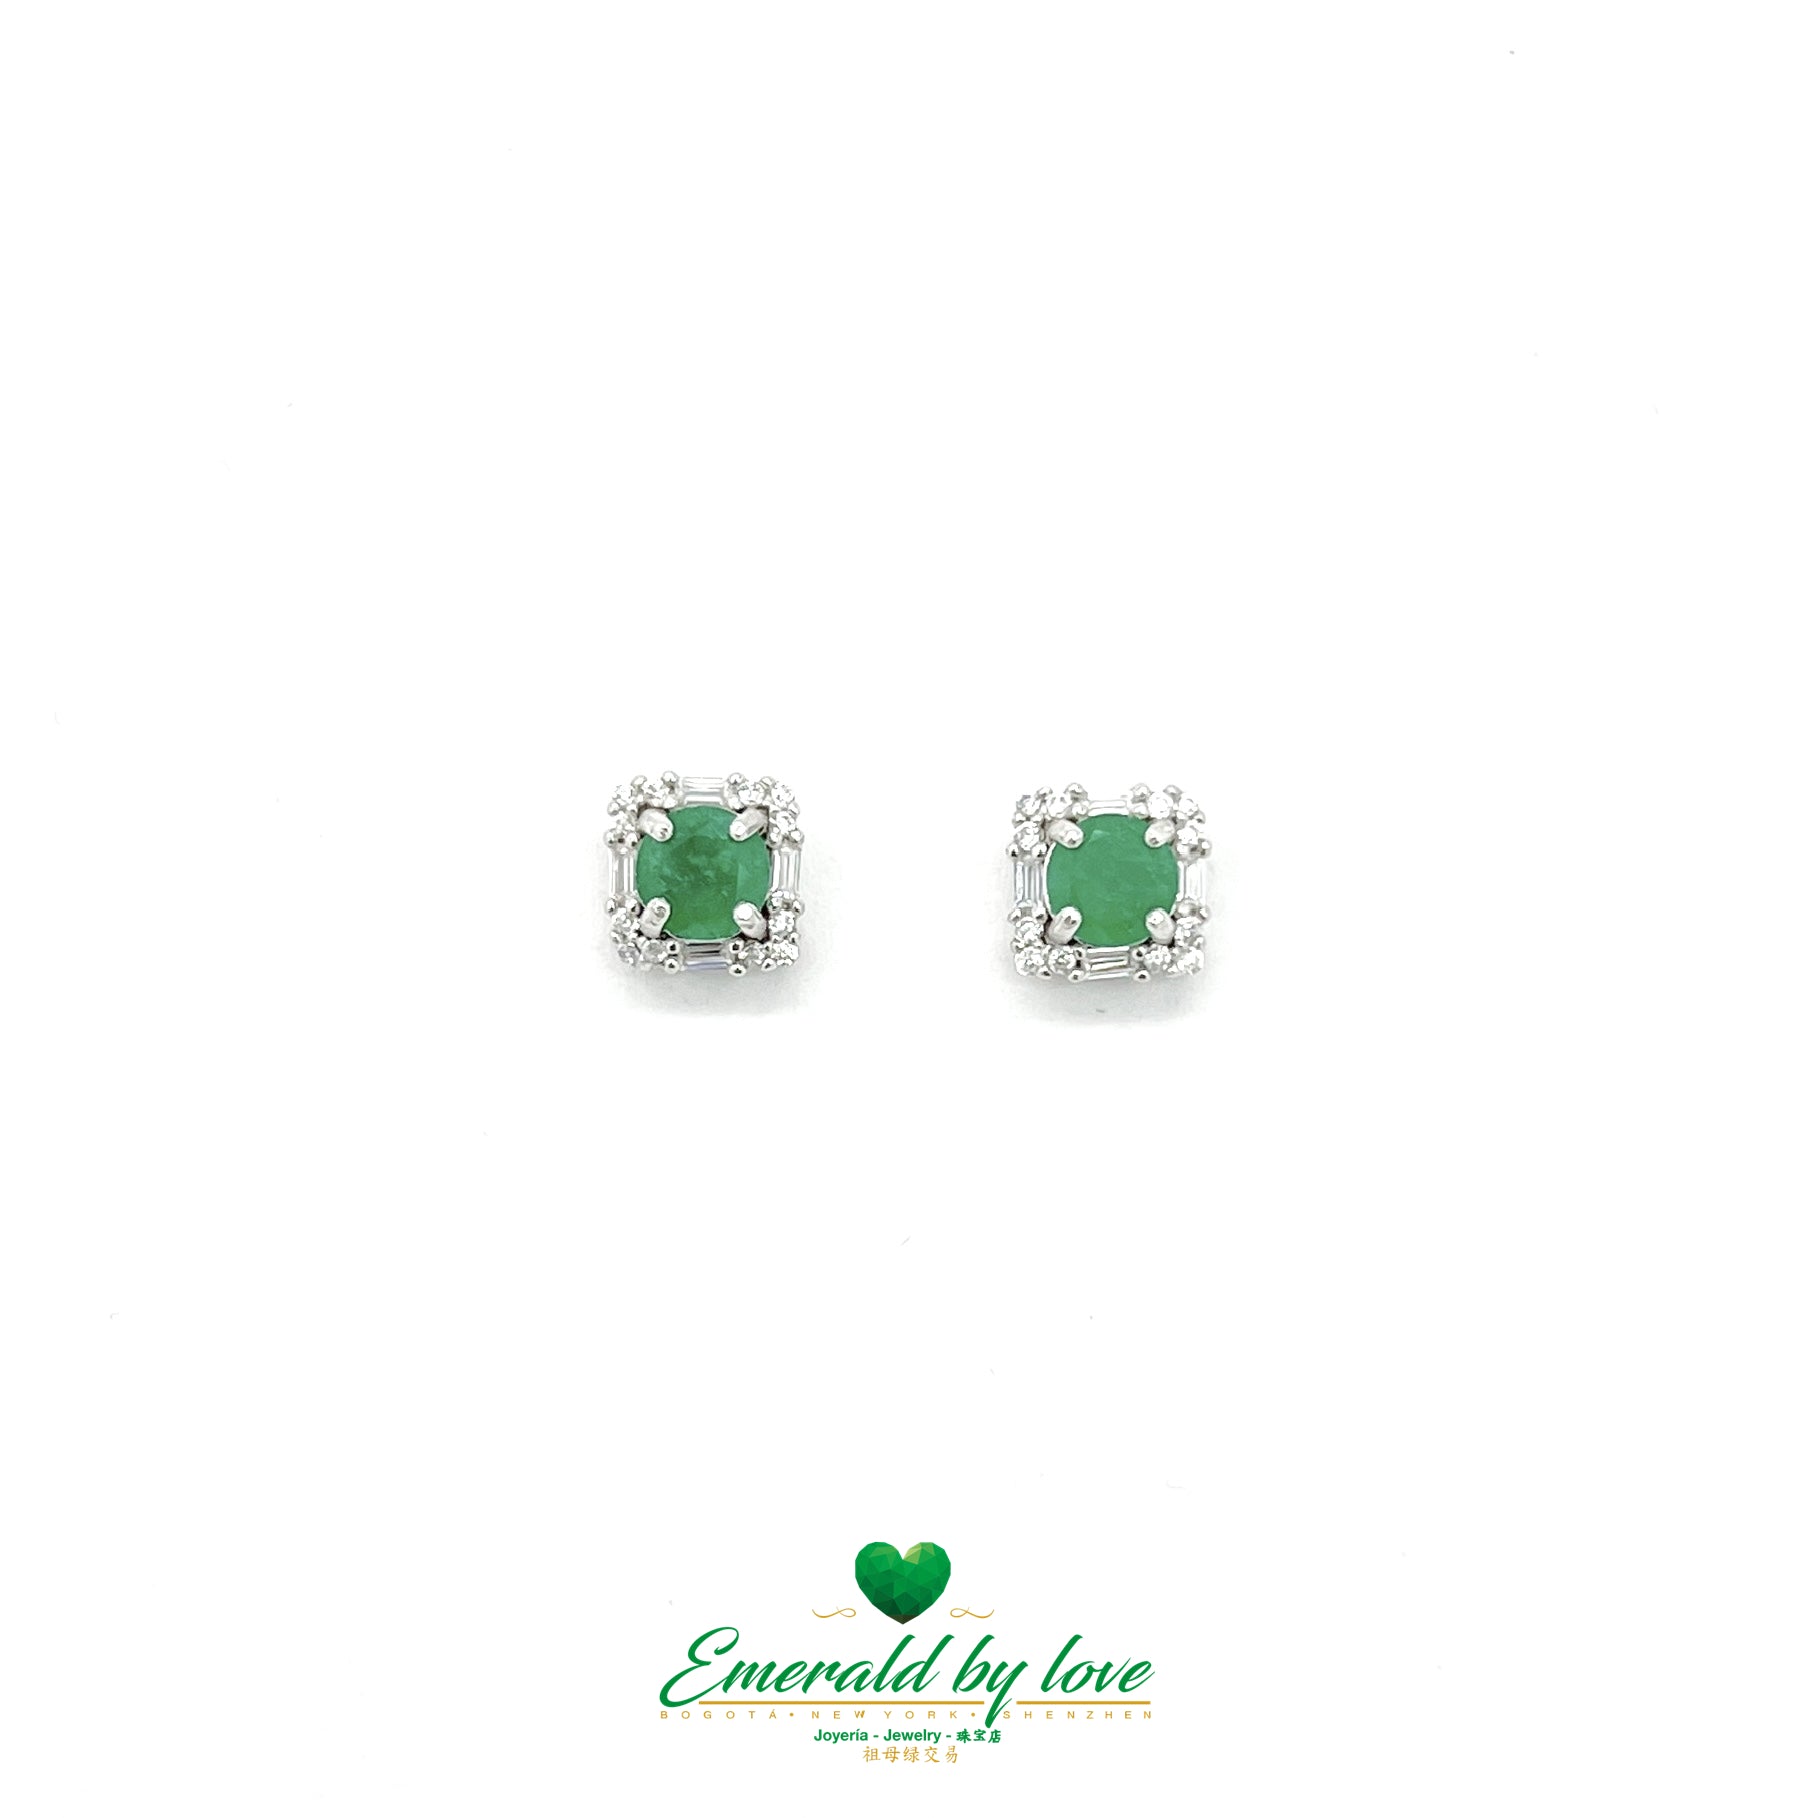 Square Sterling Silver Stud Earrings with Round Emerald Held by Four Prongs